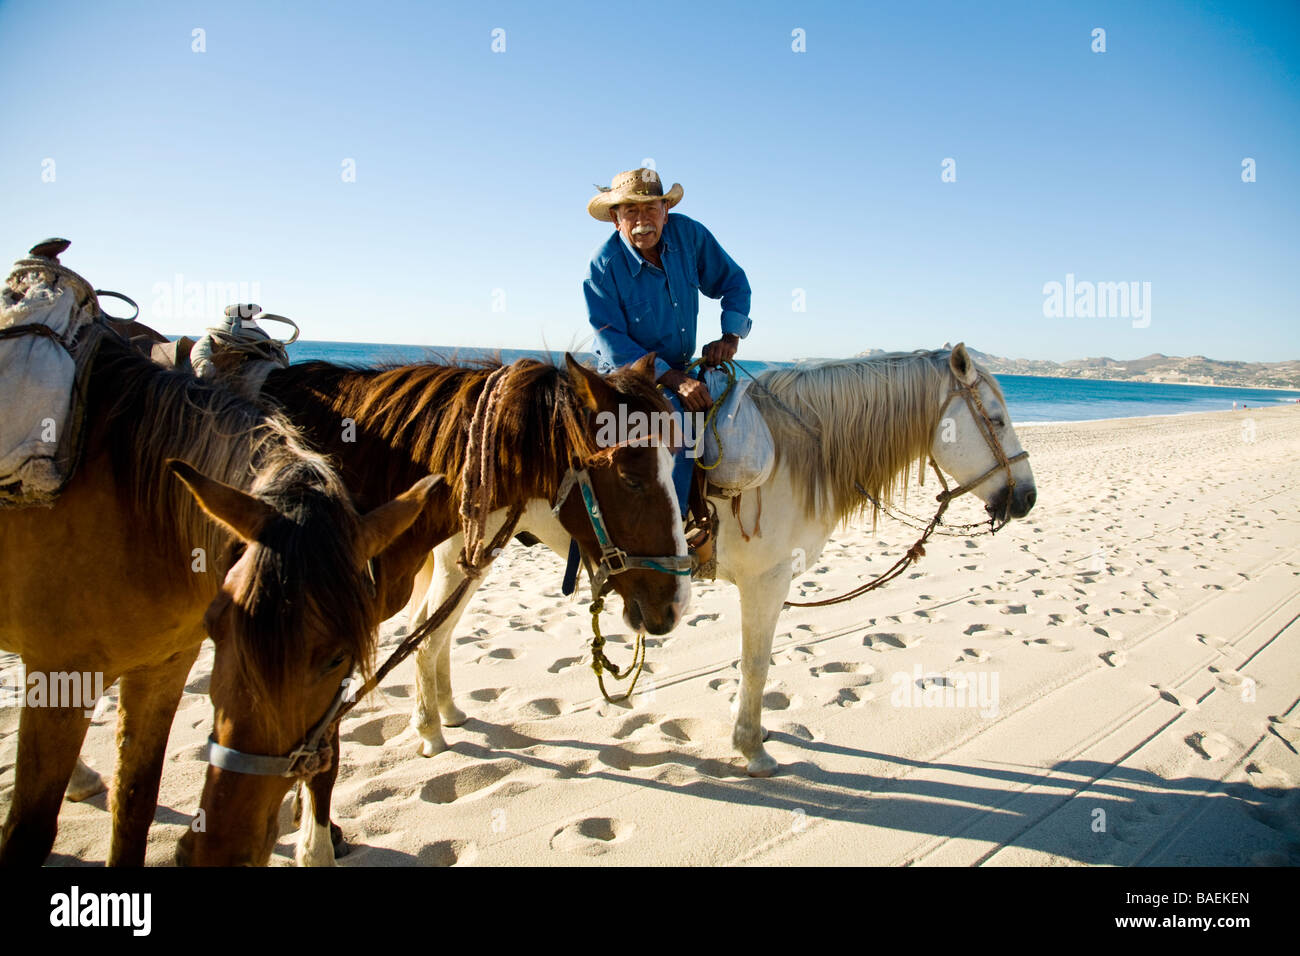 MEXICO San Jose del Cabo Mexican man on horseback wearing cowboy hat and holding reins to horses on beach Stock Photo